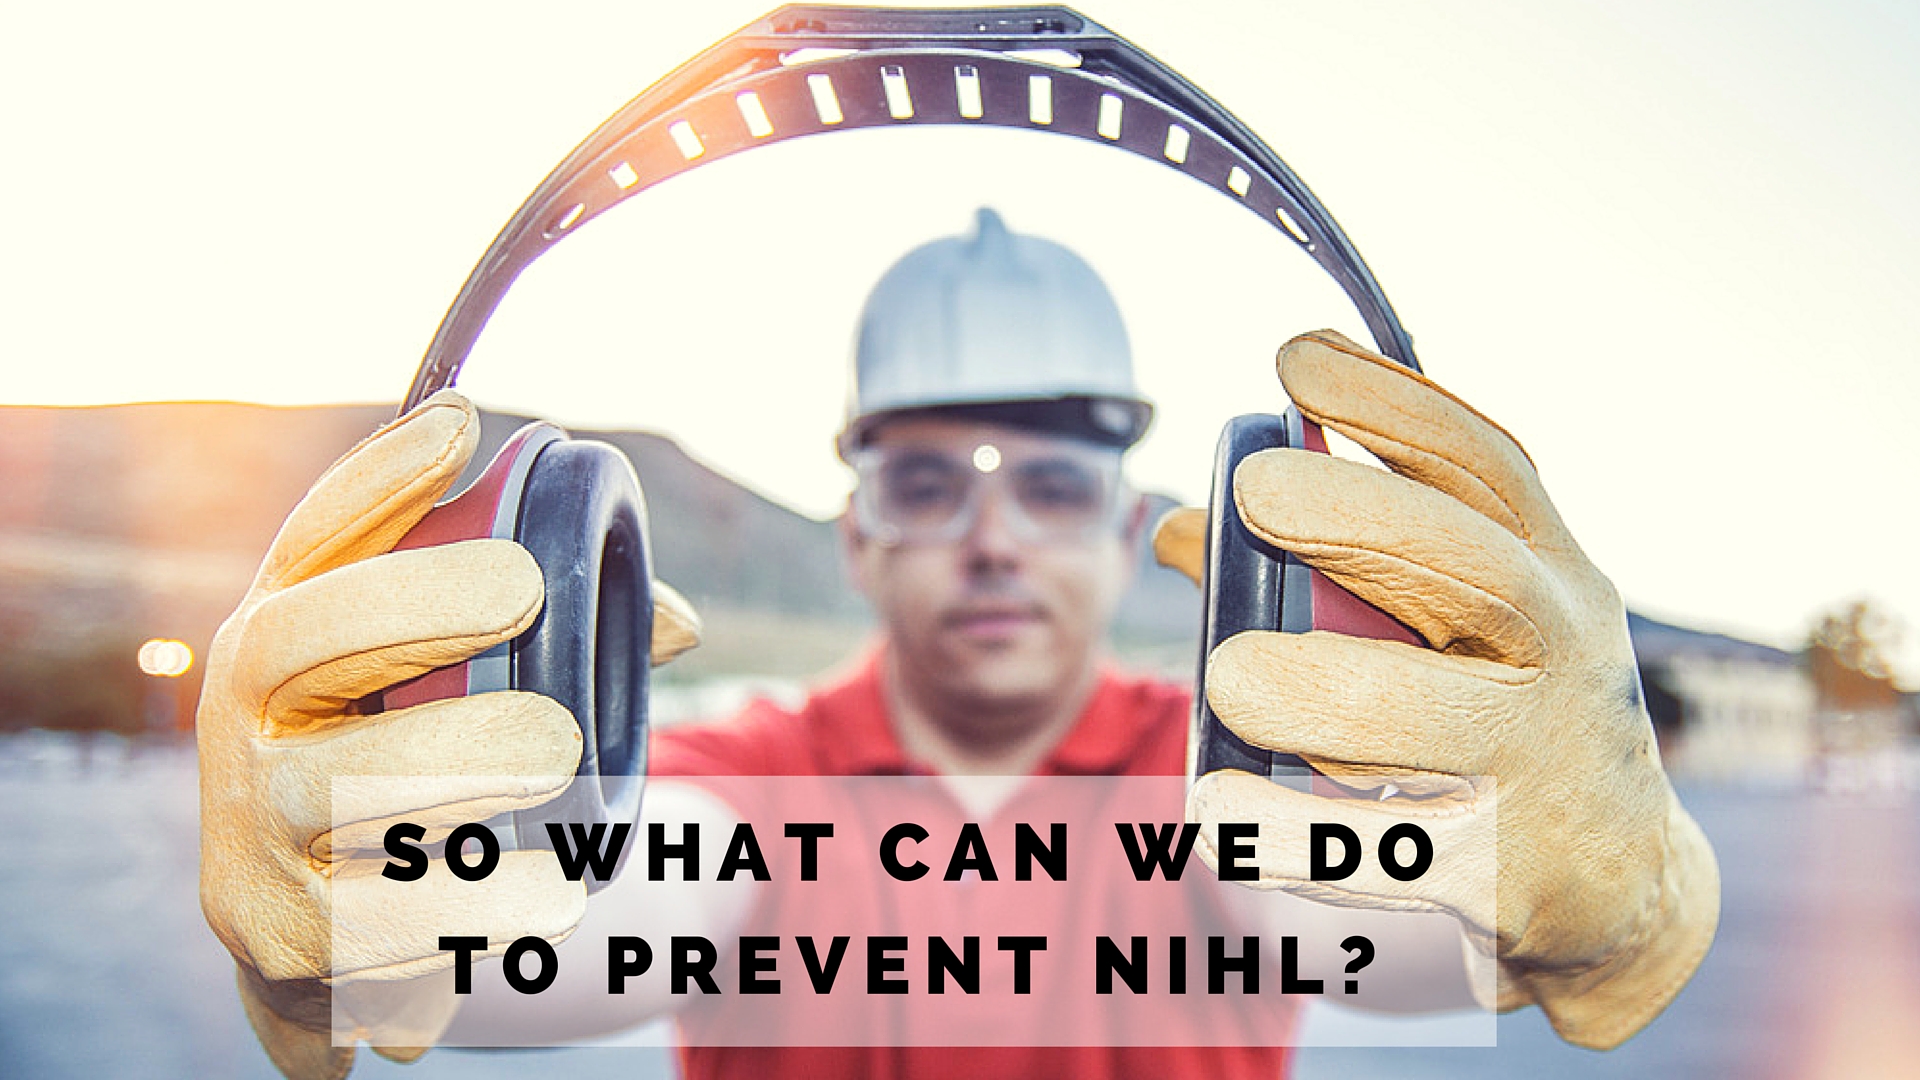 So what can we do to prevent NIHL?